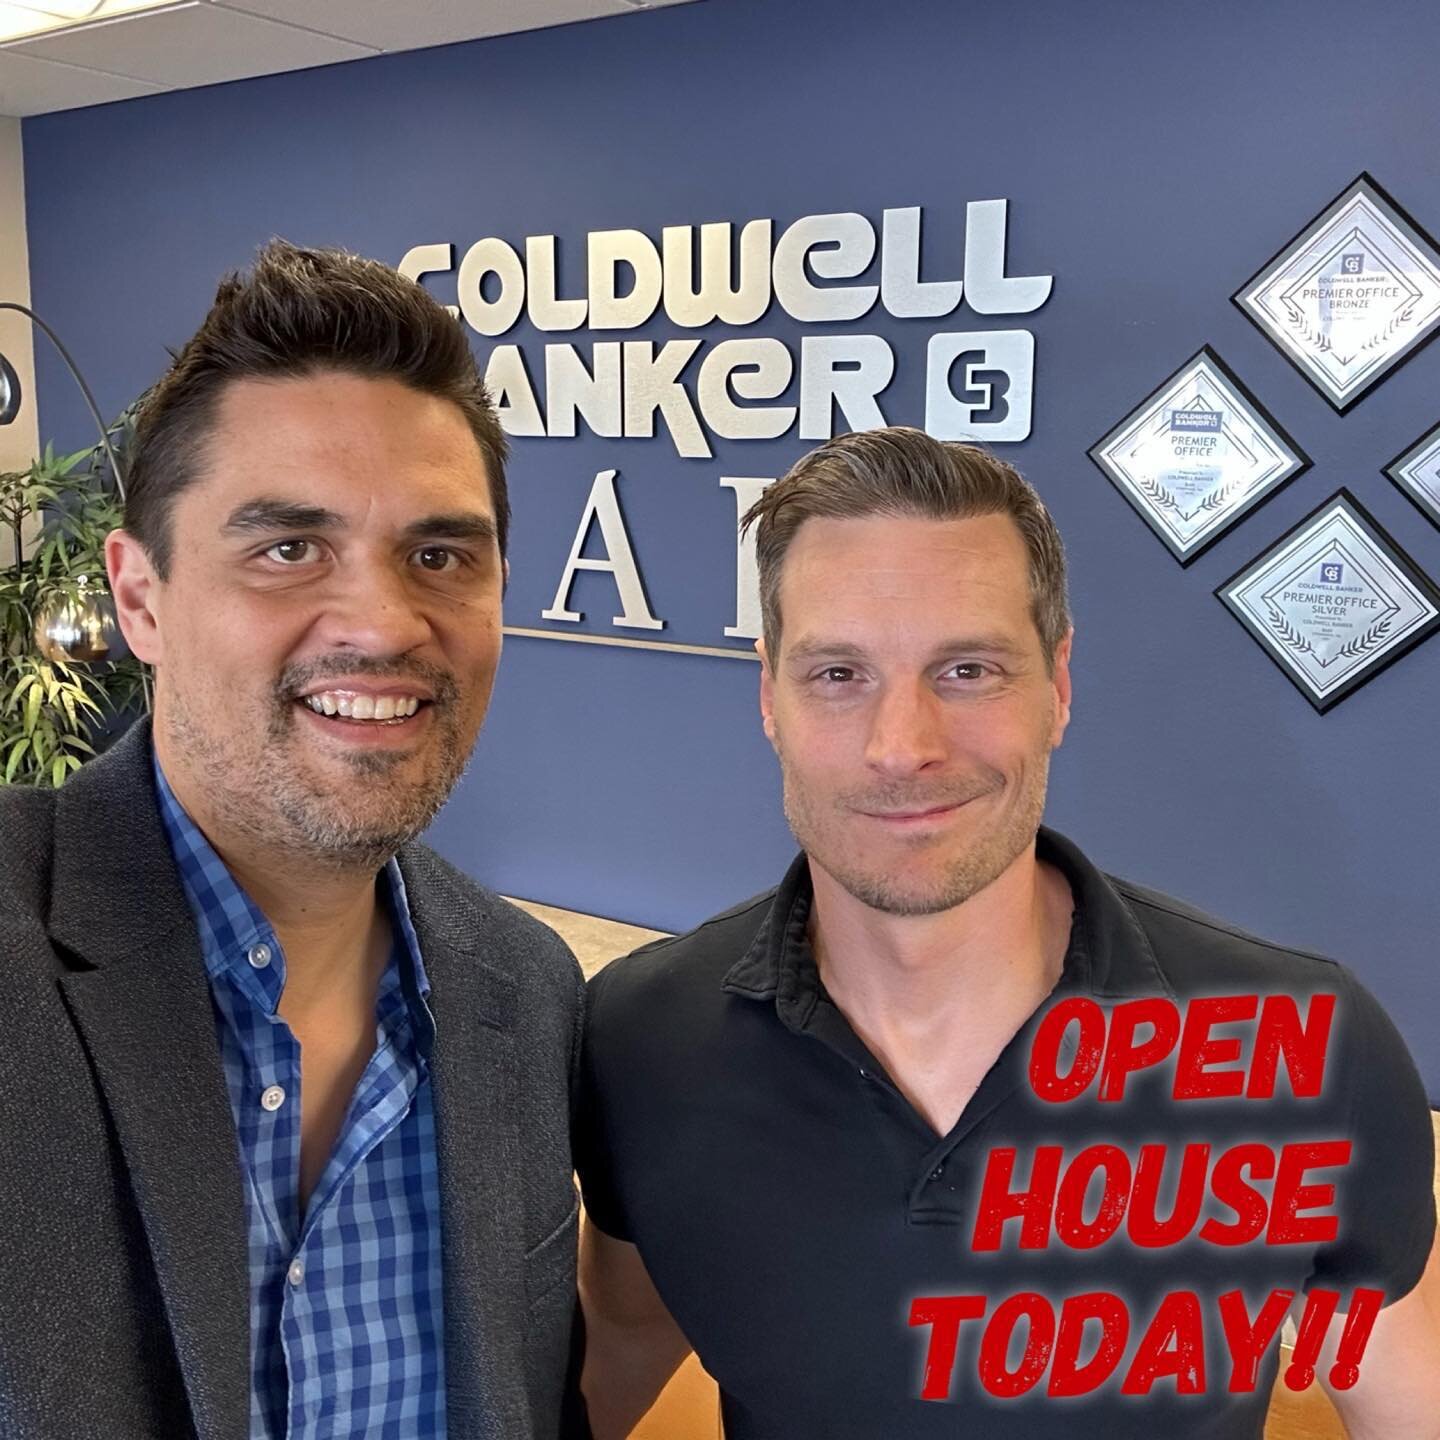 Open House Today!
Holding it with one of my Mortgage Partners Andrew Green from Greystone Capital!
Sunday 1-4pm @ 
24231 23rd Ave SE, Bothell, WA

This is an amazing property!
Come for the tour, stay for the Laughs! I LOVE HOLDING OPENS WITH ANDREW!
